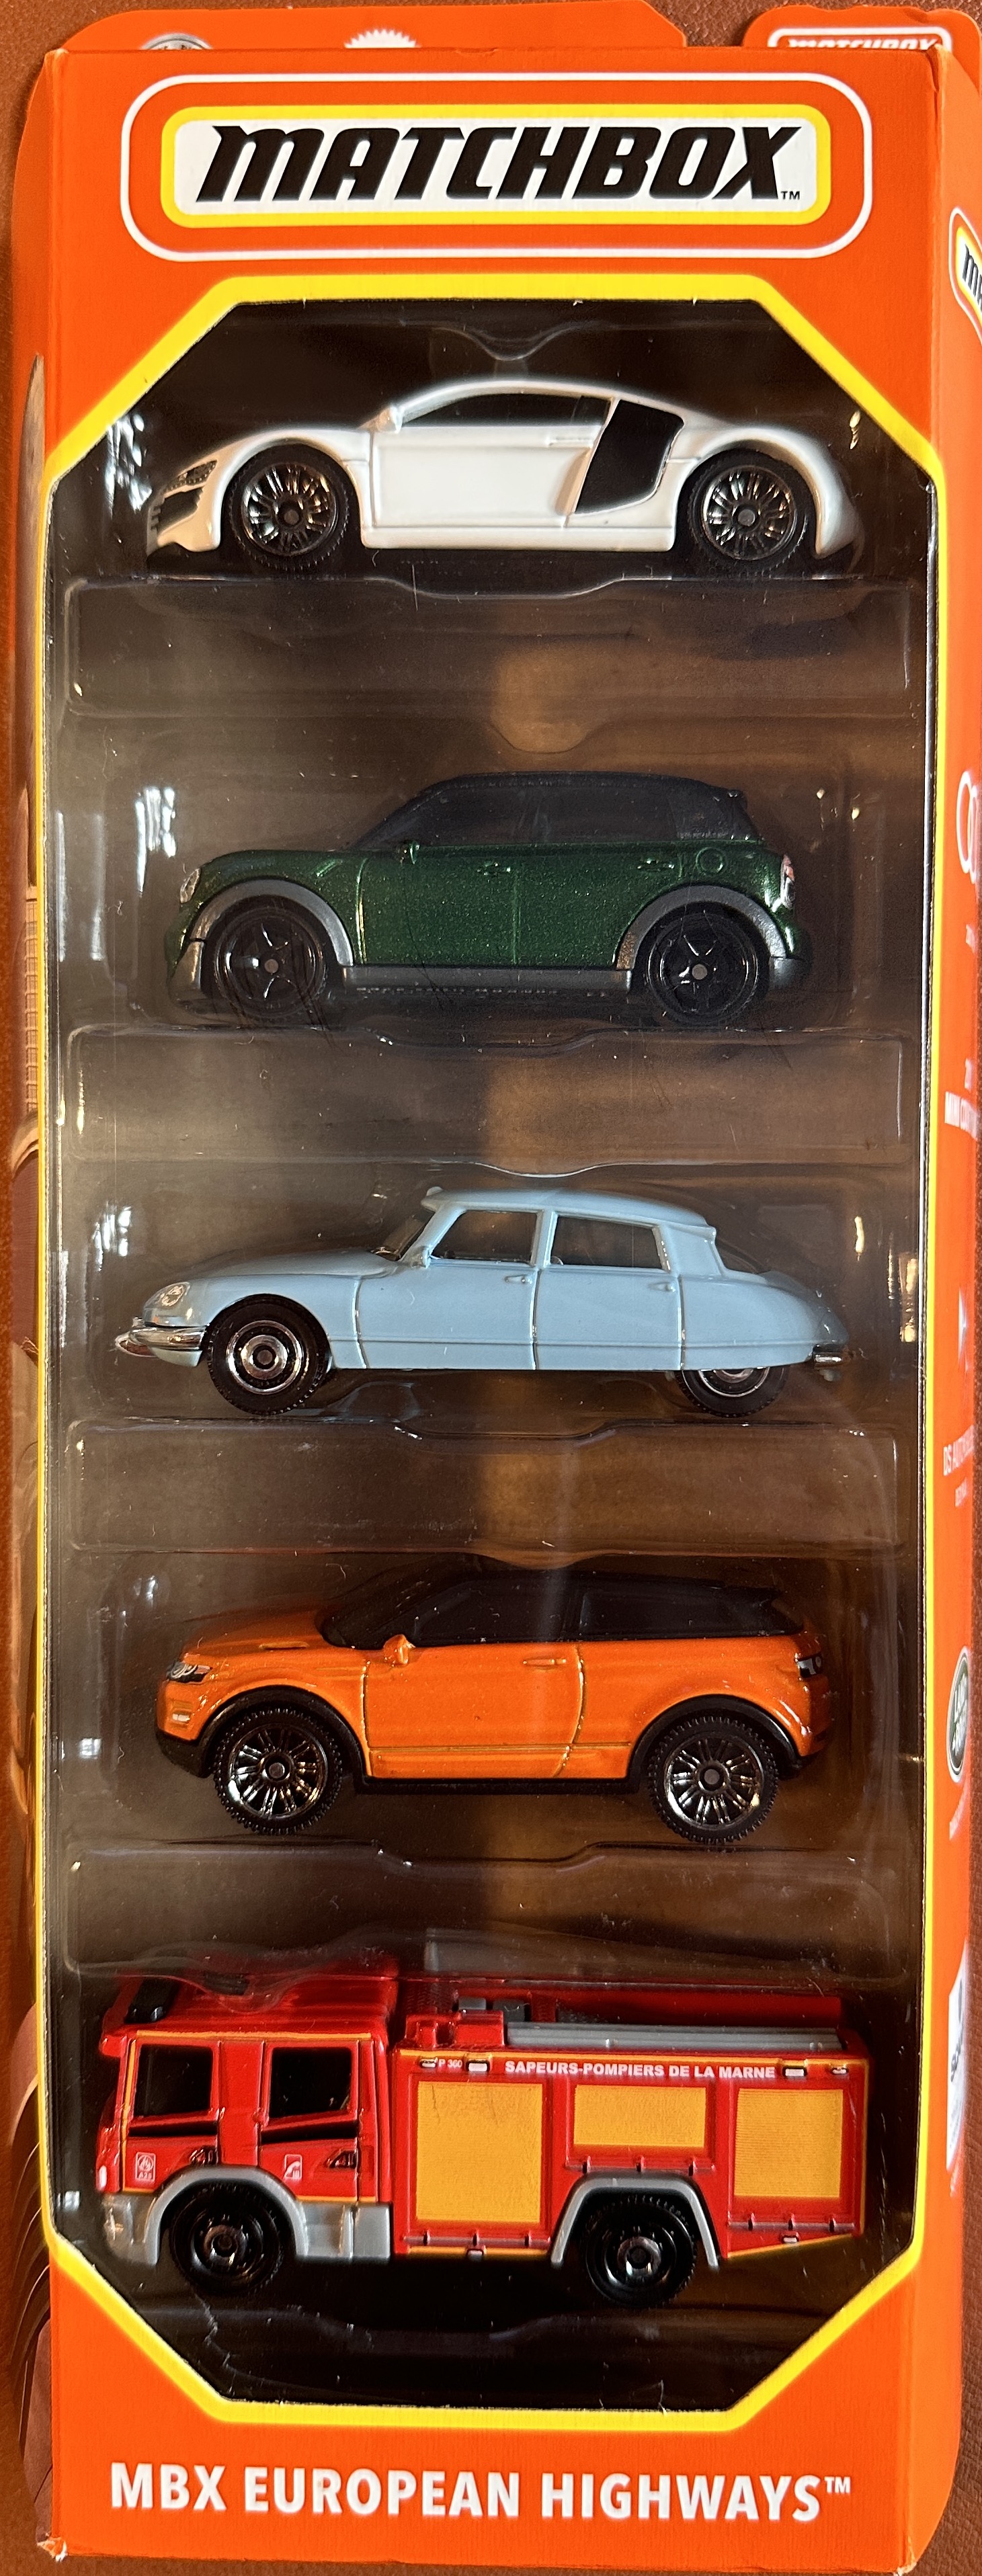 5 Pack Matchbox Cars - A2Z Science & Learning Toy Store